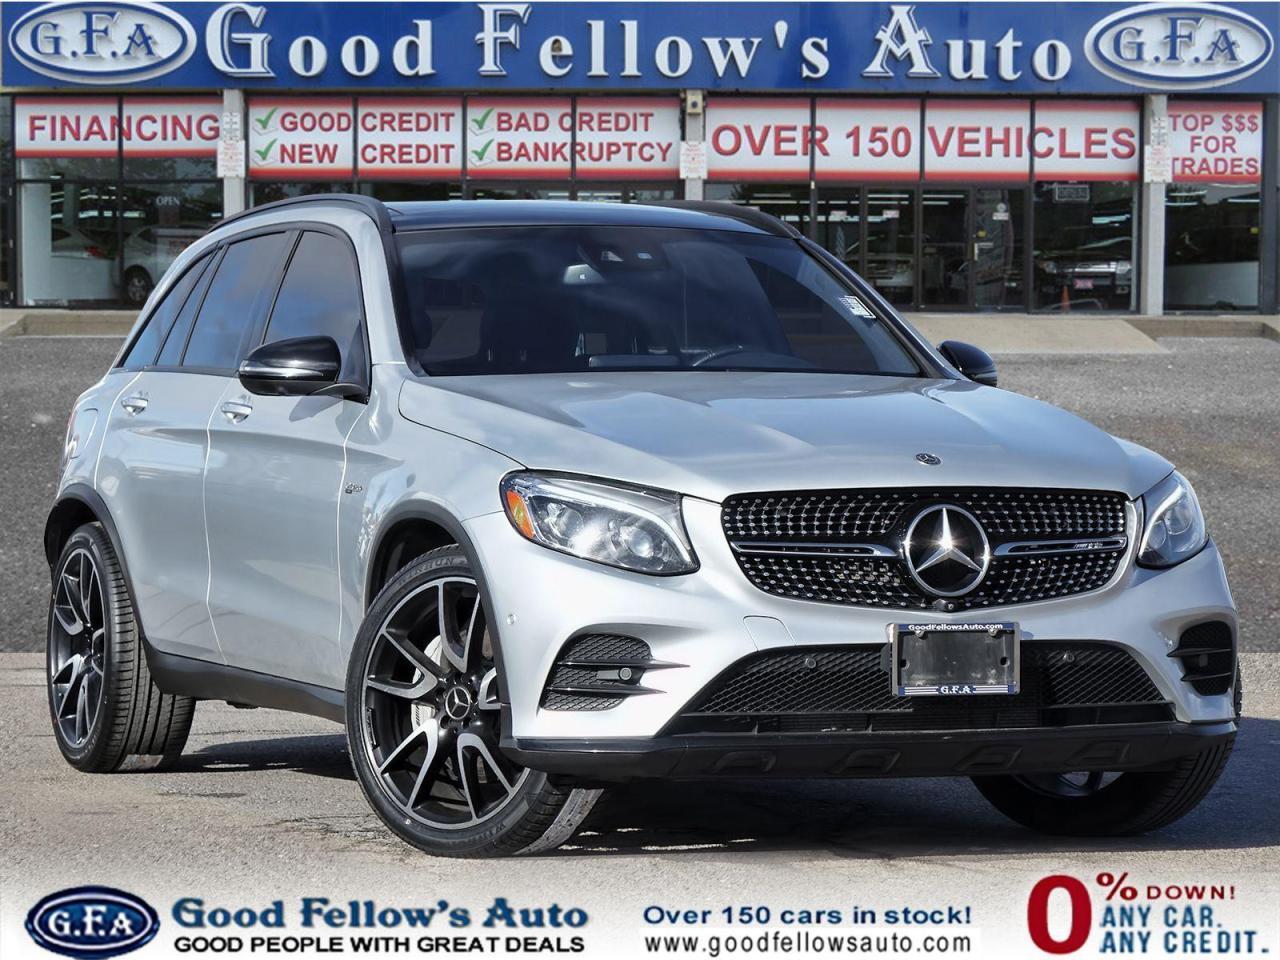 2019 Mercedes-Benz AMG GLC 43 AMG43, LEATHER SEATS, PANORAMIC ROOF, NAVIGATION